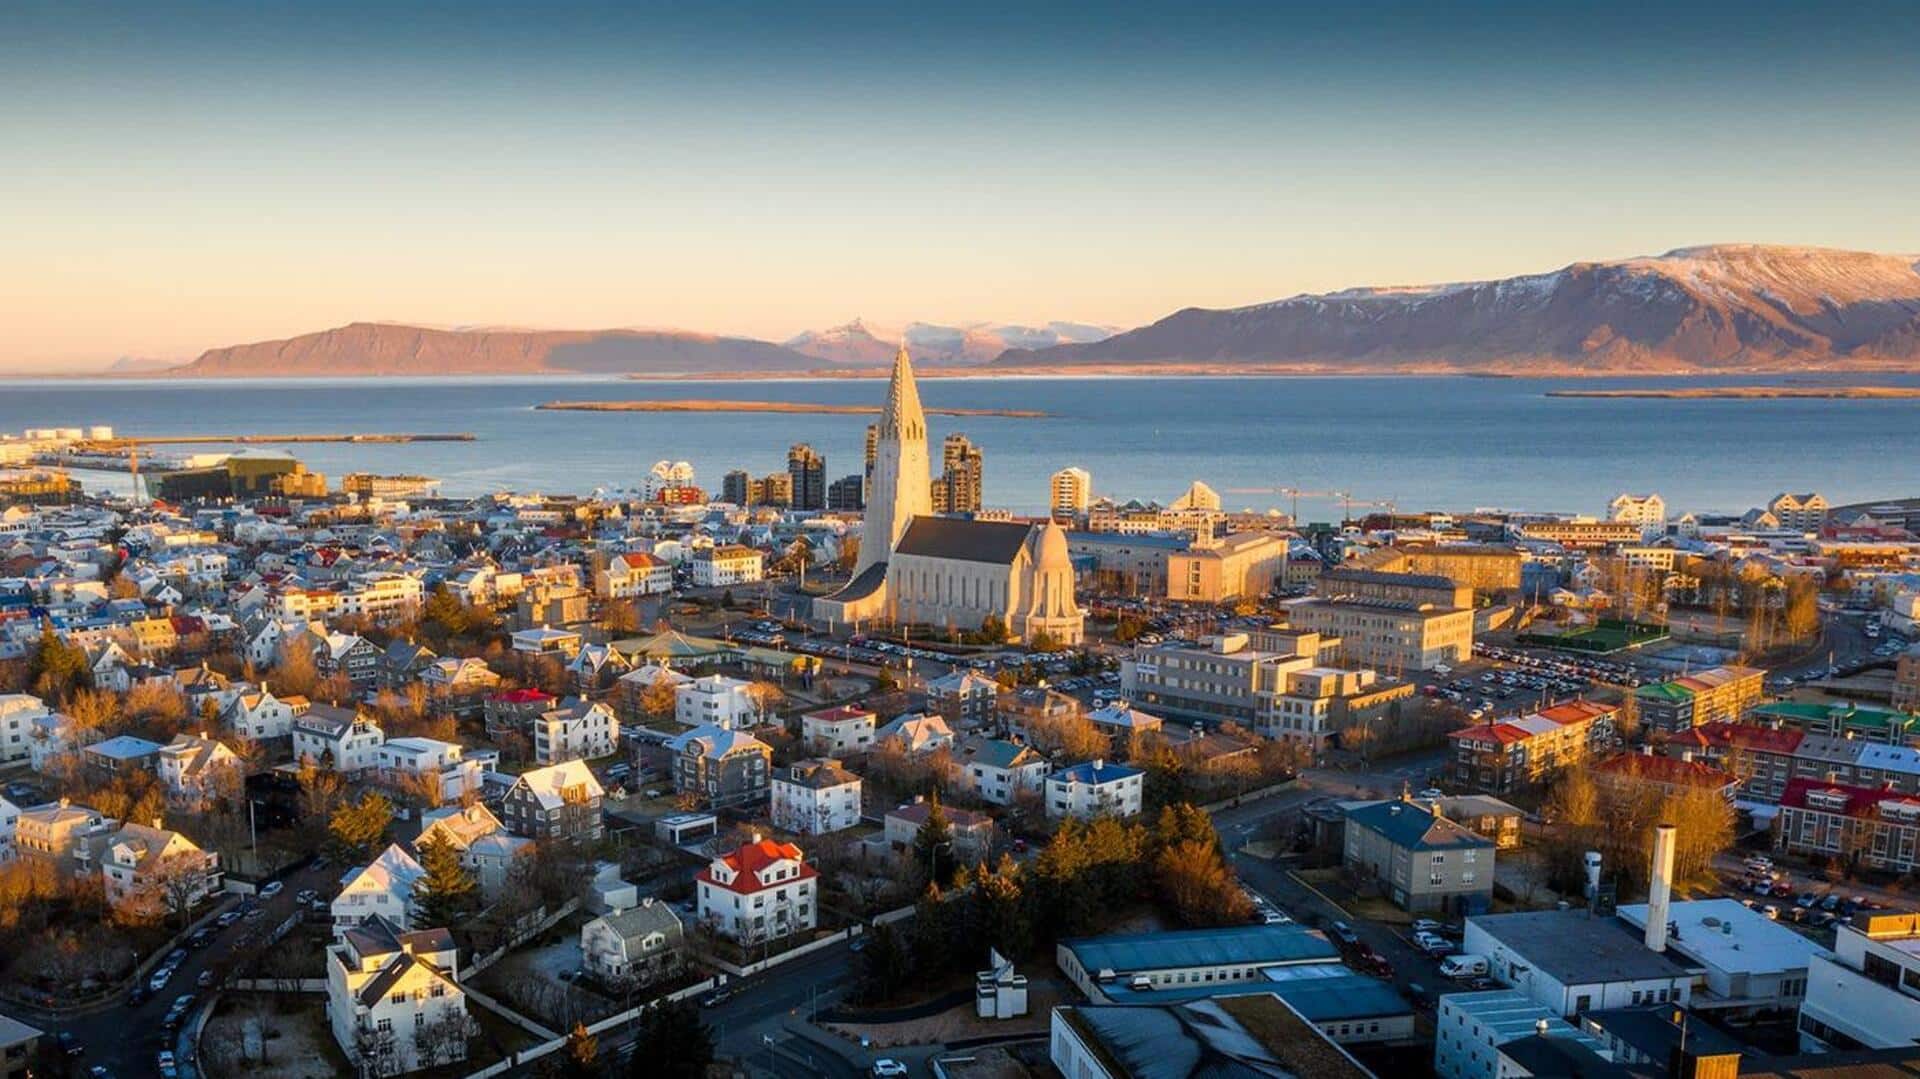 Thrills and evenings in Reykjavik, Iceland: Things to do